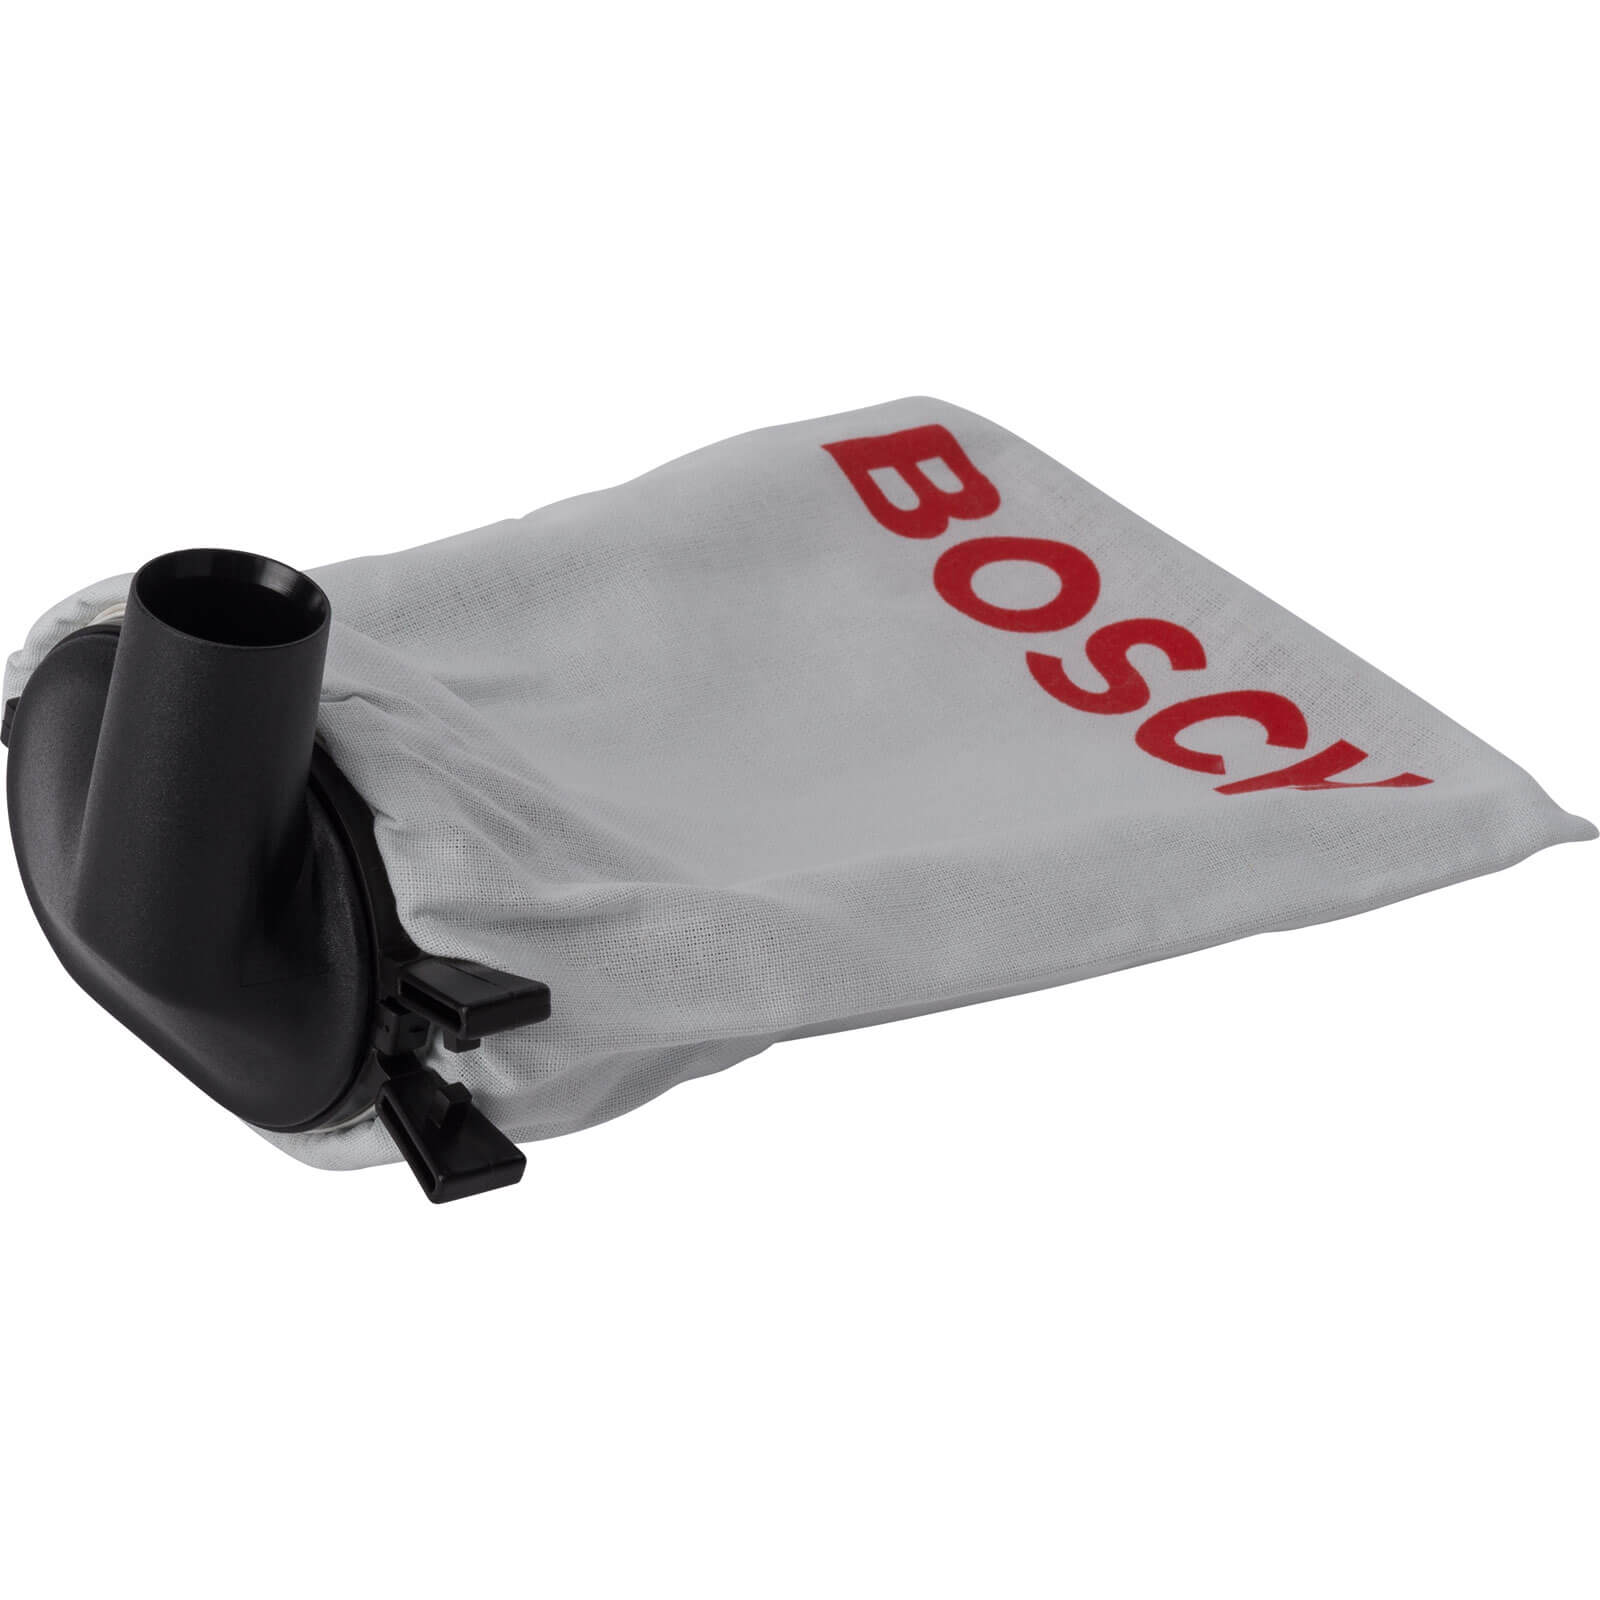 Photo of Bosch Dust Bag For Pbs 60 And Pex 115 And 125 Sanders